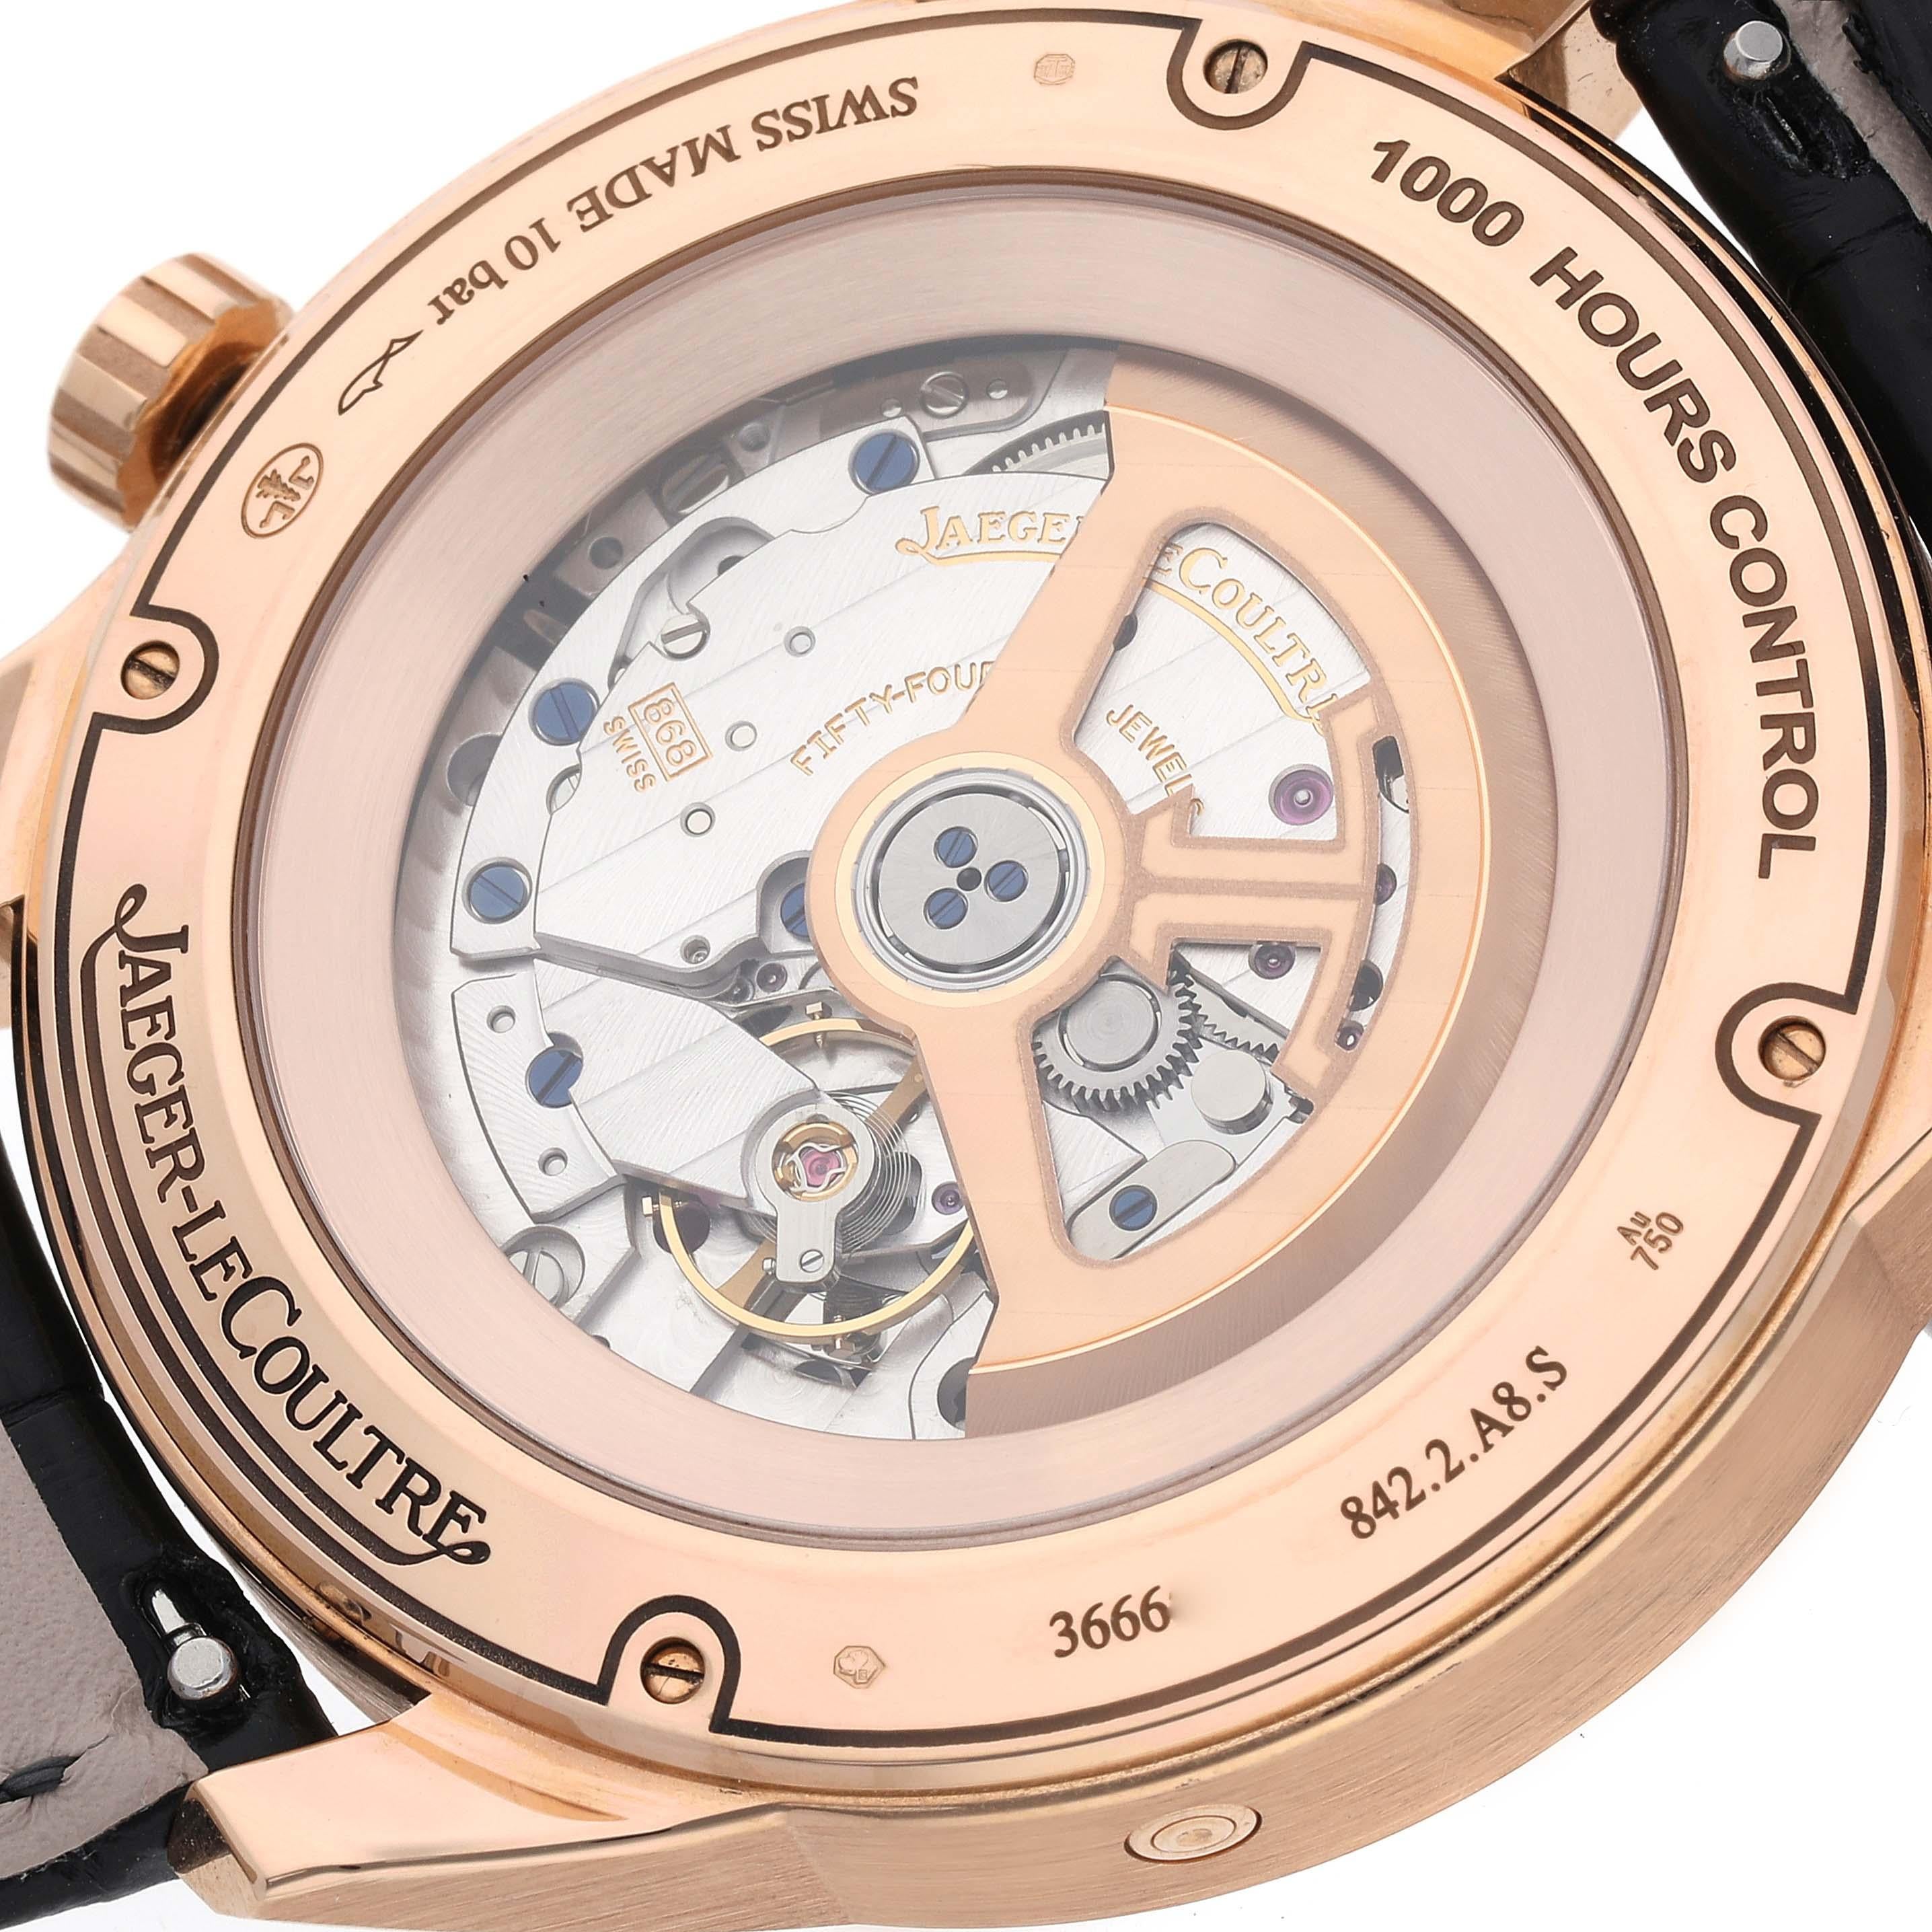 Jaeger LeCoultre Polaris Perpetual Calendar Rose Gold Mens Watch 842.2.A8.S Q9082680 Box Card. Self-winding automatic movement. 18k rose gold case 42.0 mm in diameter. Exhibition transparent sapphire crystal caseback. 18k rose gold smooth bezel.